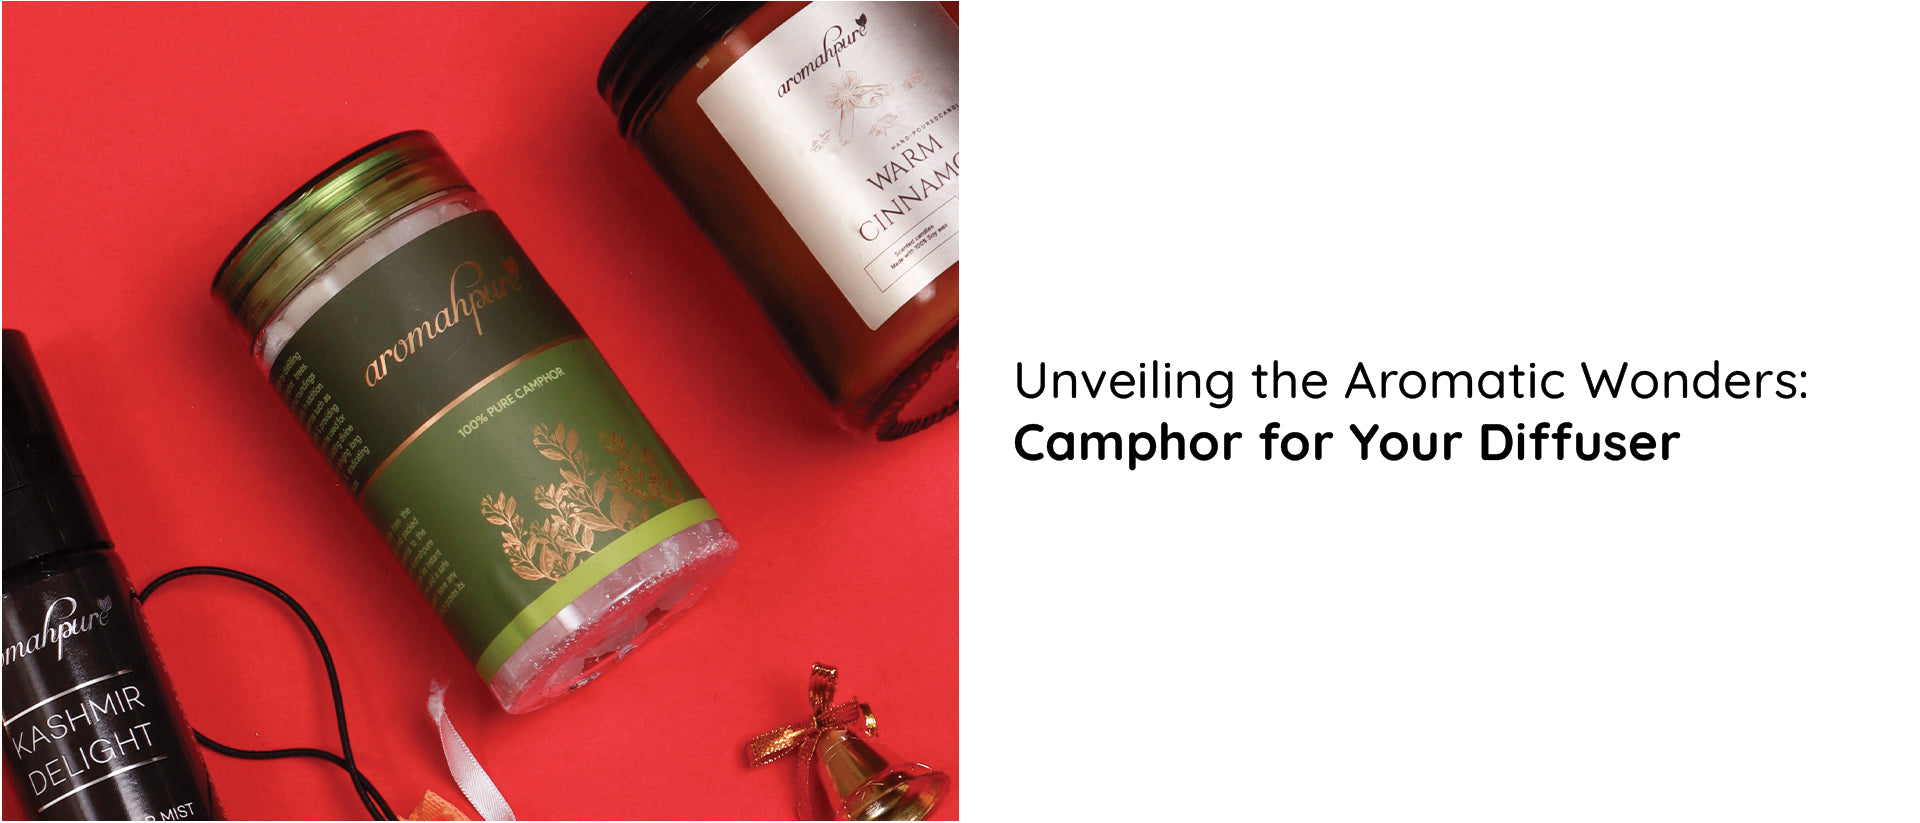 Unveiling the Aromatic Wonders: Camphor for Your Diffuser